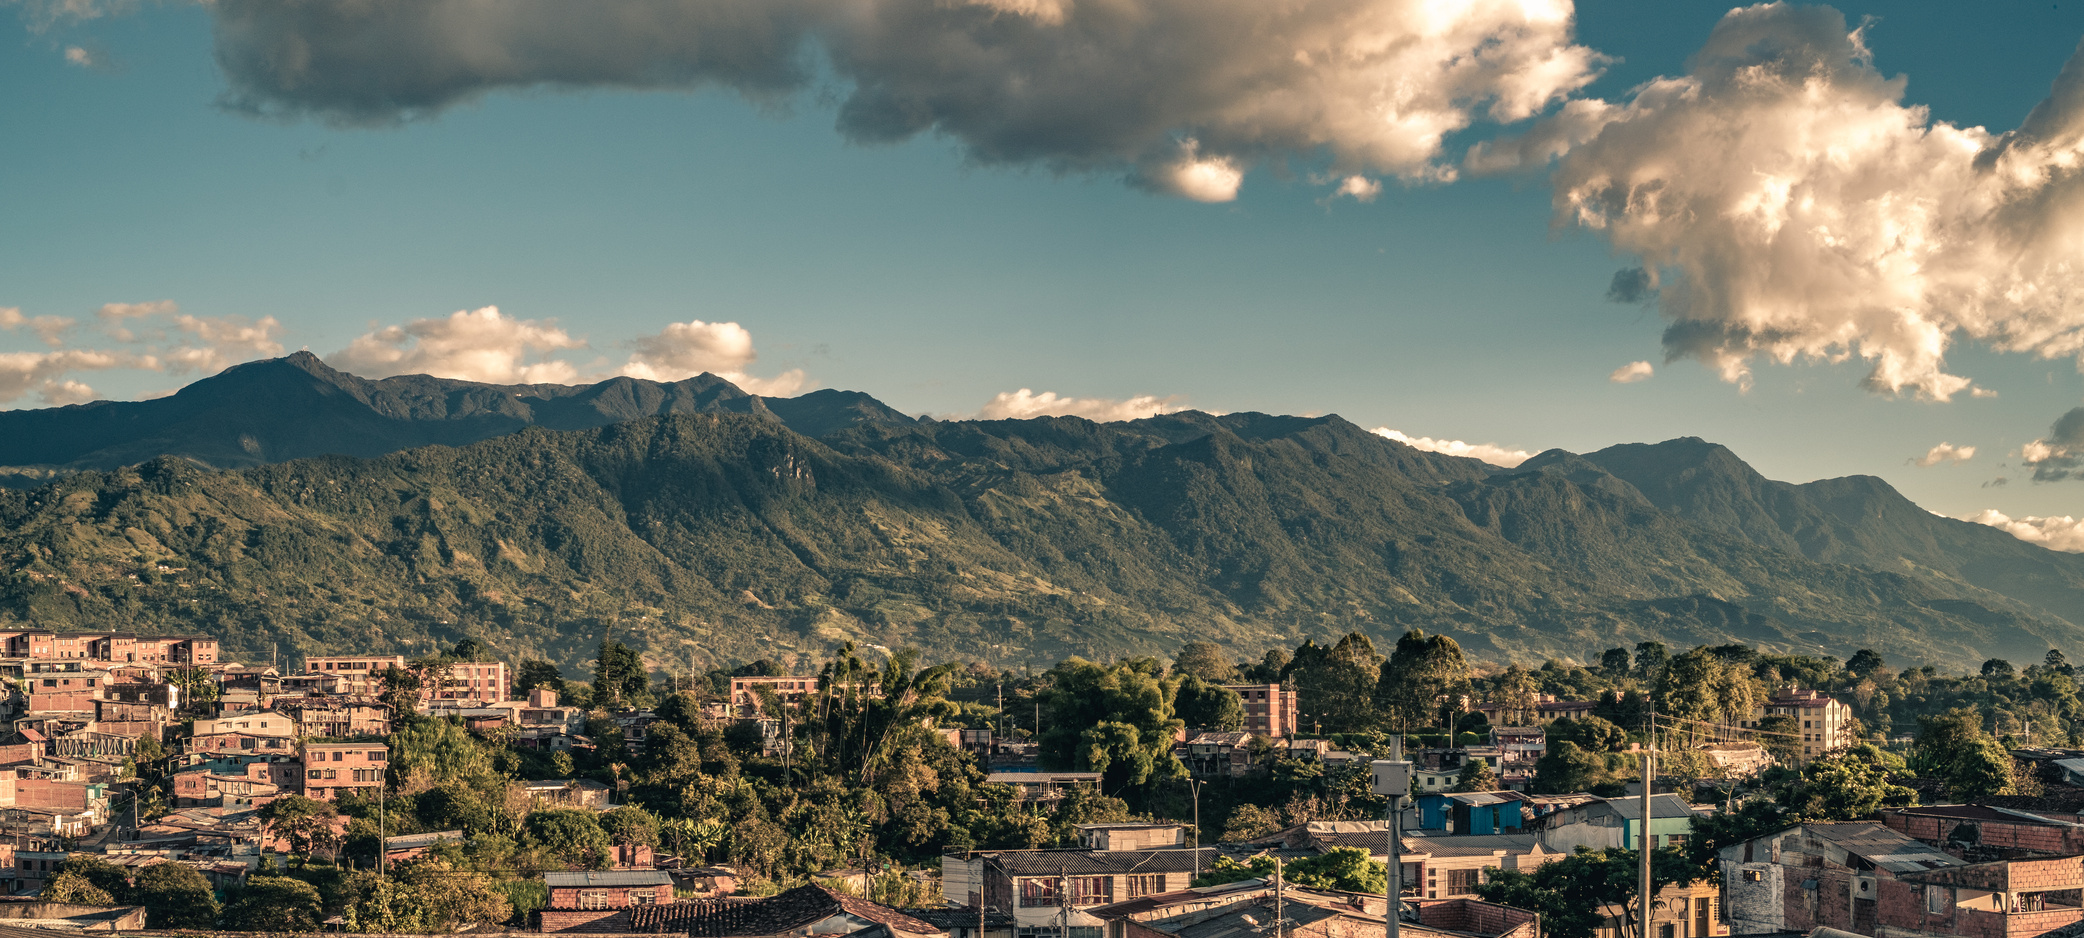 Armenia, Quindio Colombia, and its eastern mountain range